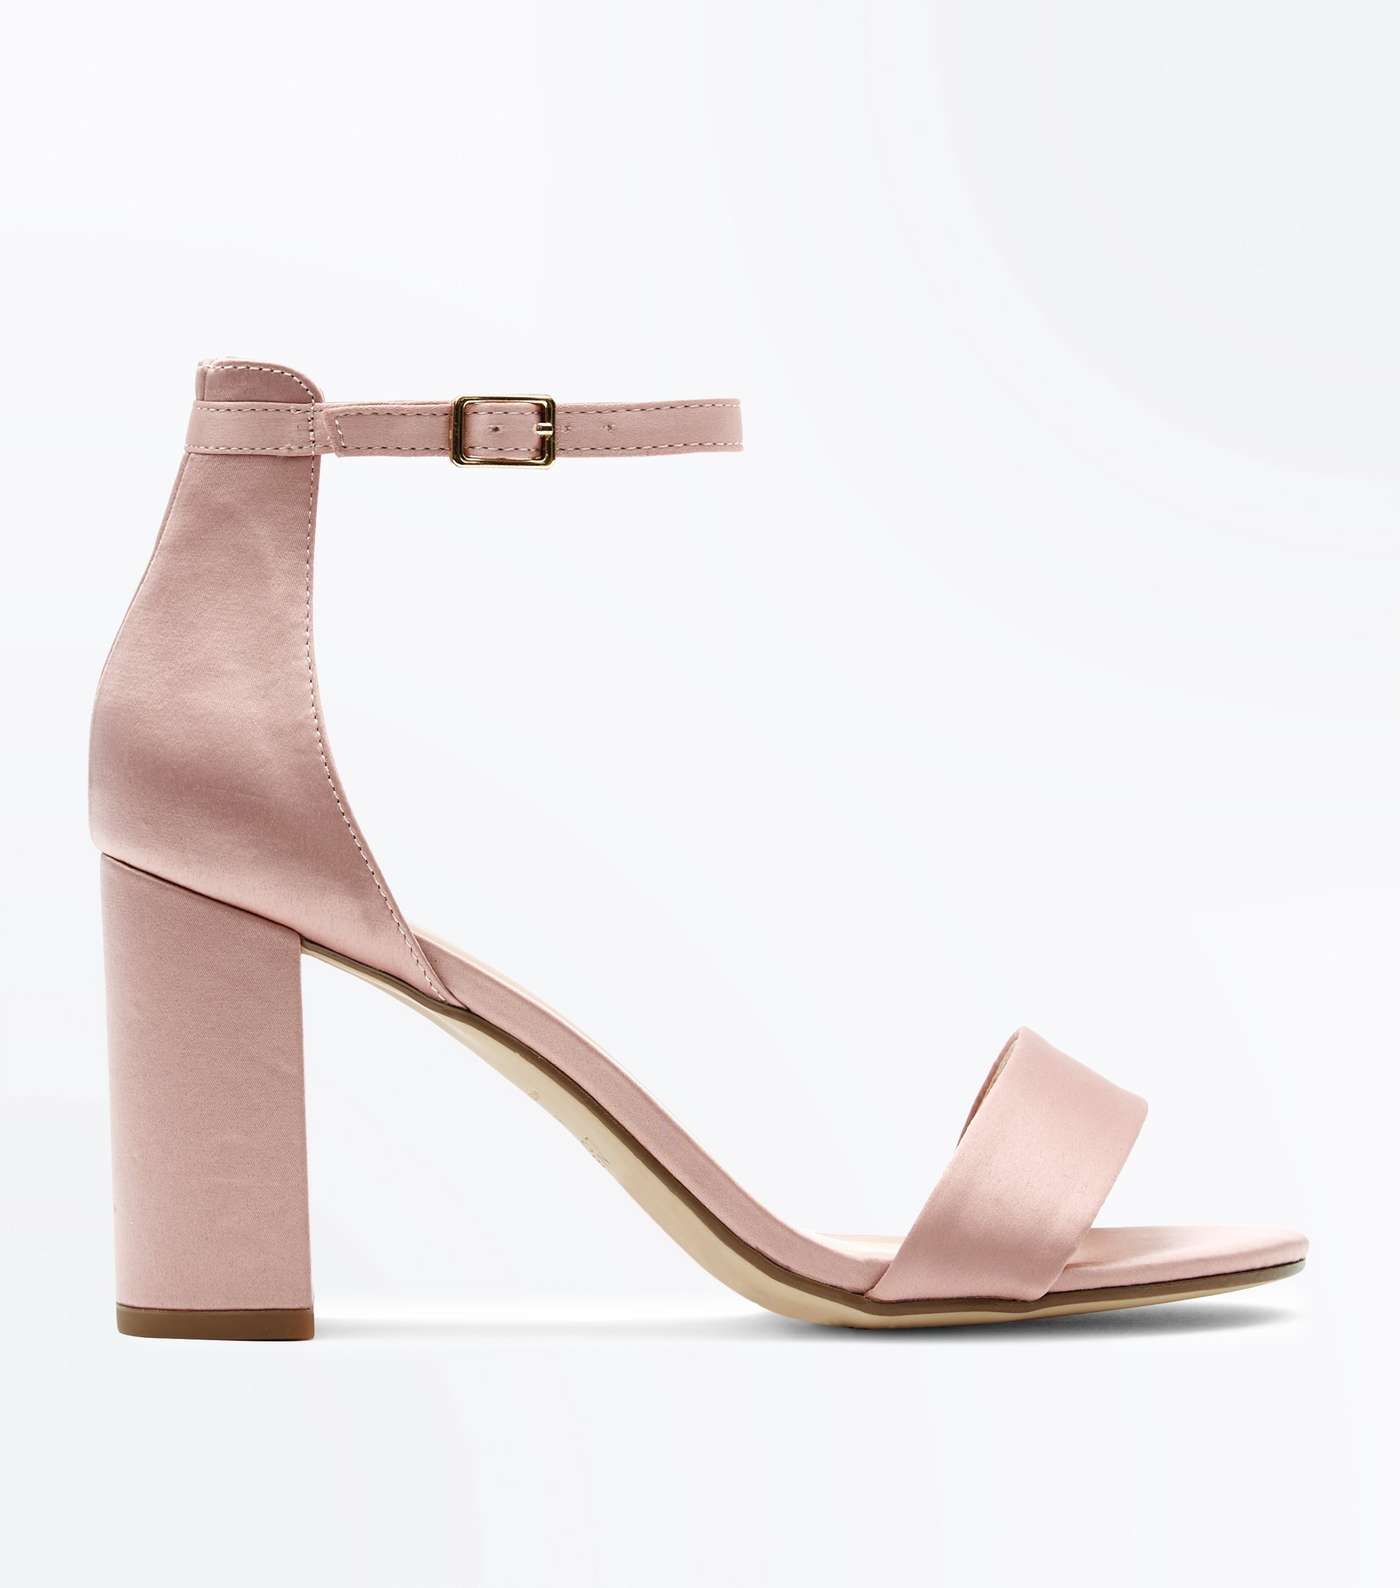 Wide Fit Nude Satin Ankle Strap Block Heels